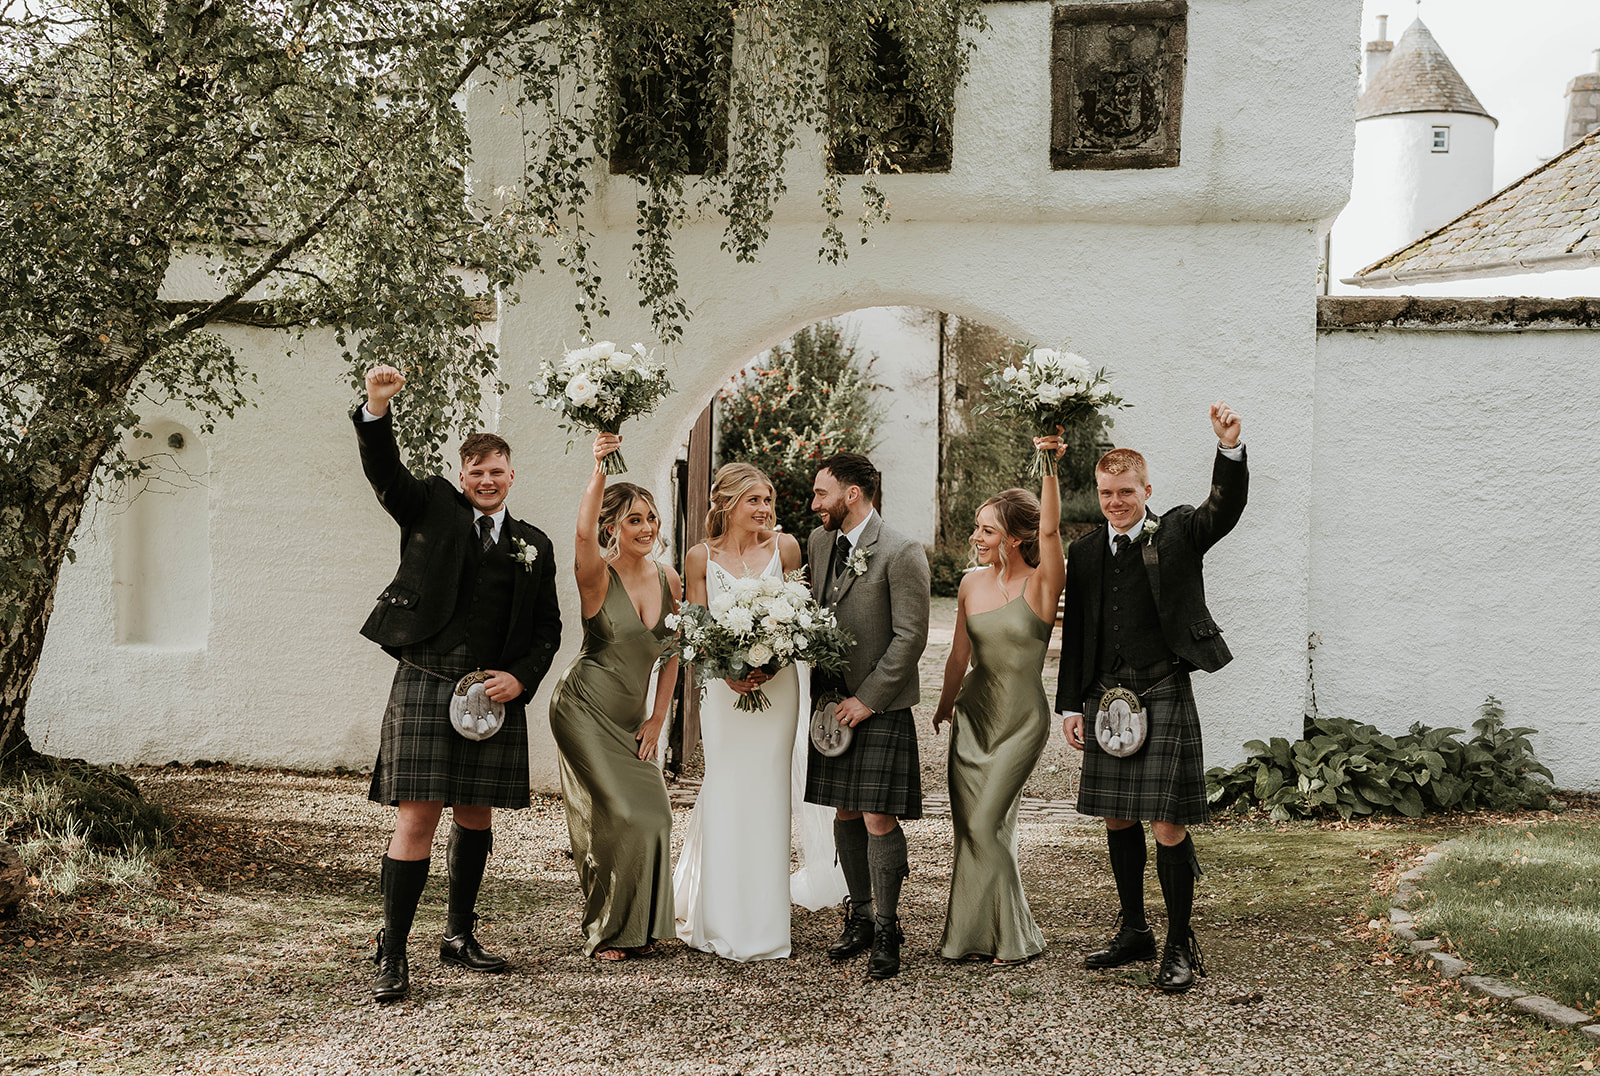 A BRIDAL PARTY CELEBRATING A WEDDING AT LOGIE COUNTRY HOUSE